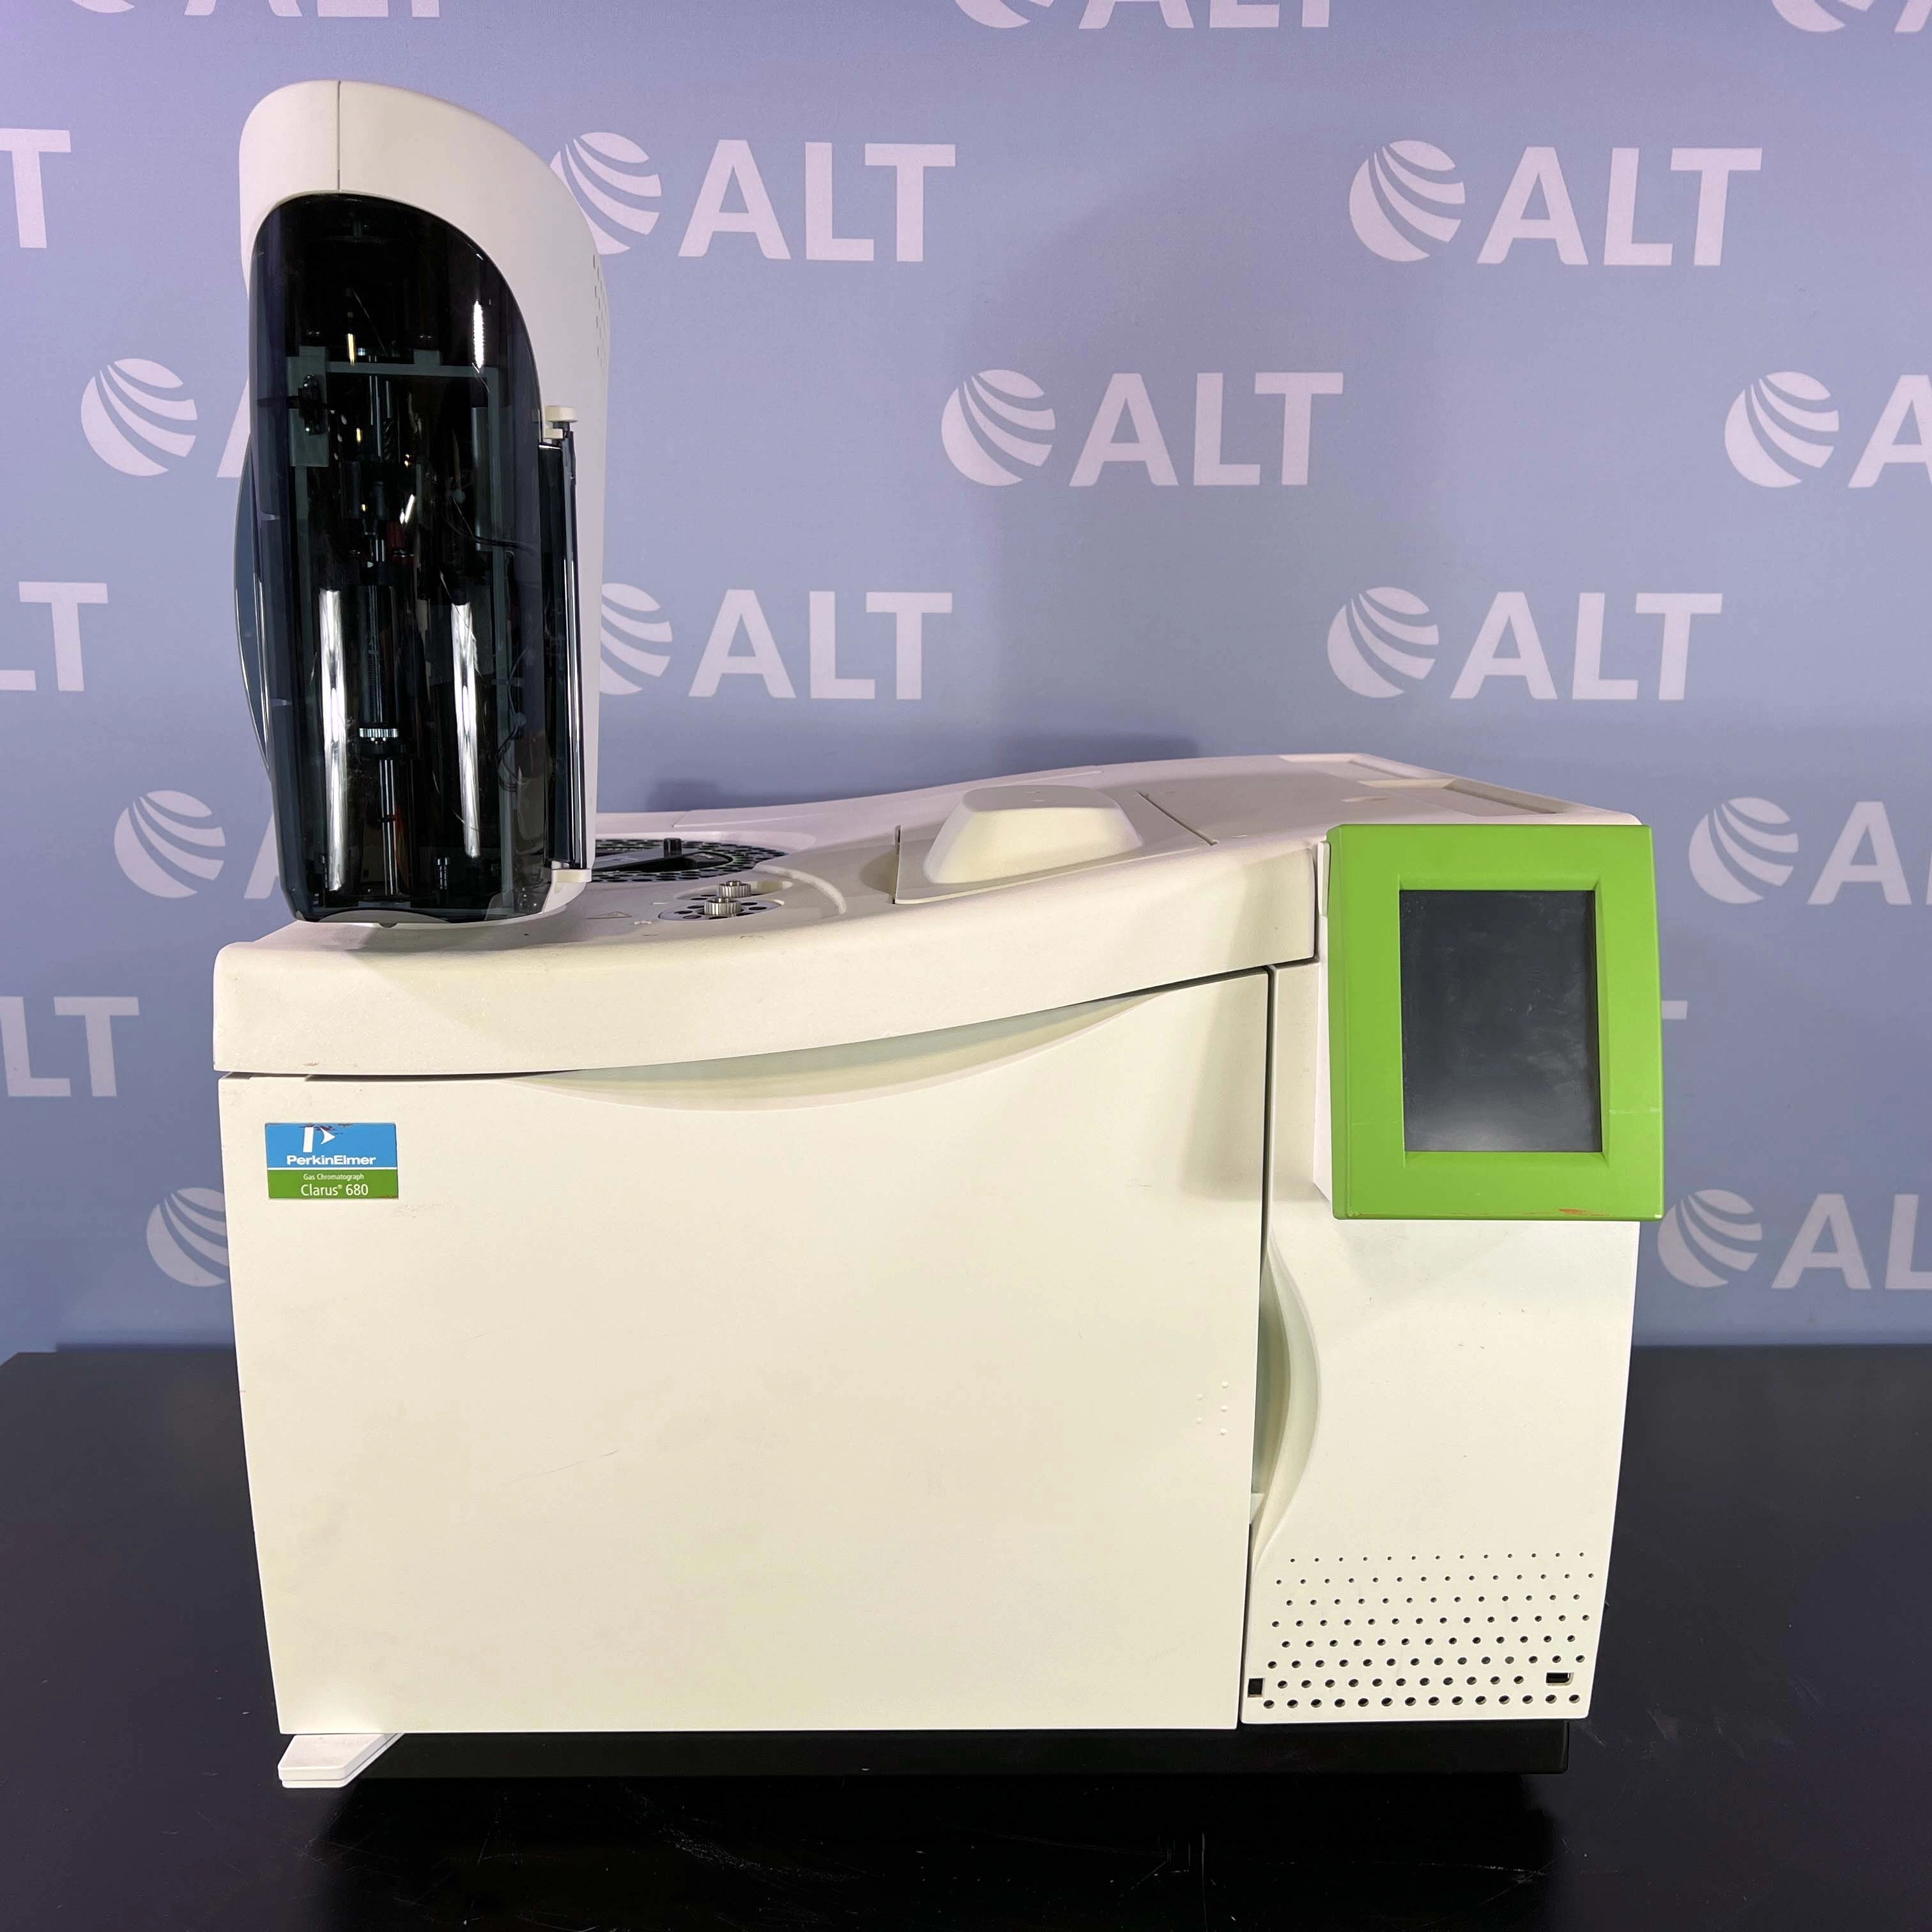 PerkinElmer Clarus 680 Gas Chromatograph With Dual Flame Ionization Detectors (FID)